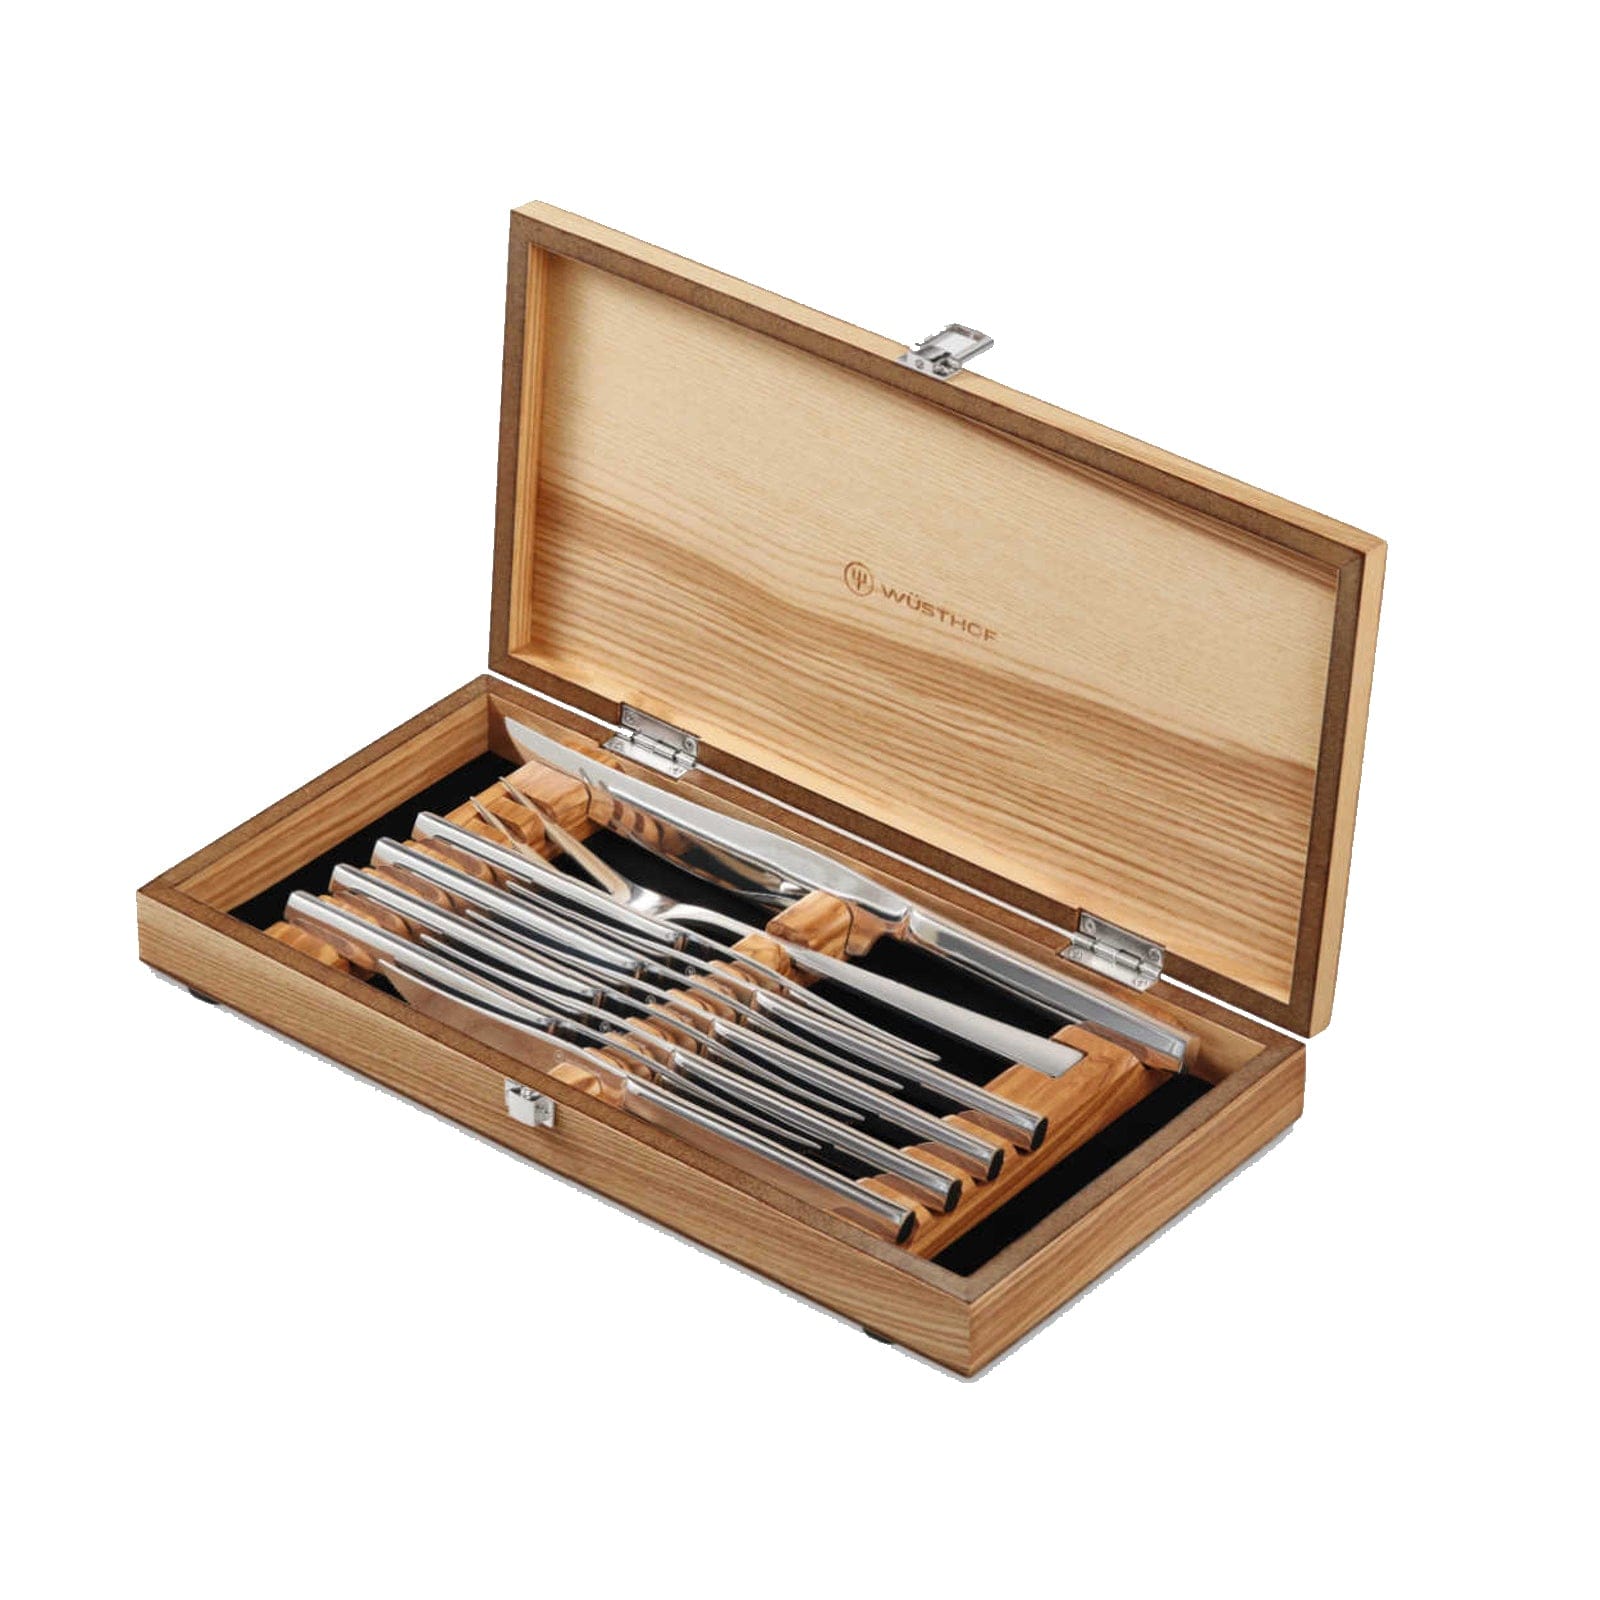 https://cdn.shopify.com/s/files/1/0474/2338/9856/products/wusthof-wusthof-mignon-10-piece-stainless-steel-steak-and-carving-set-43299-33848337858720_1600x.jpg?v=1678300294